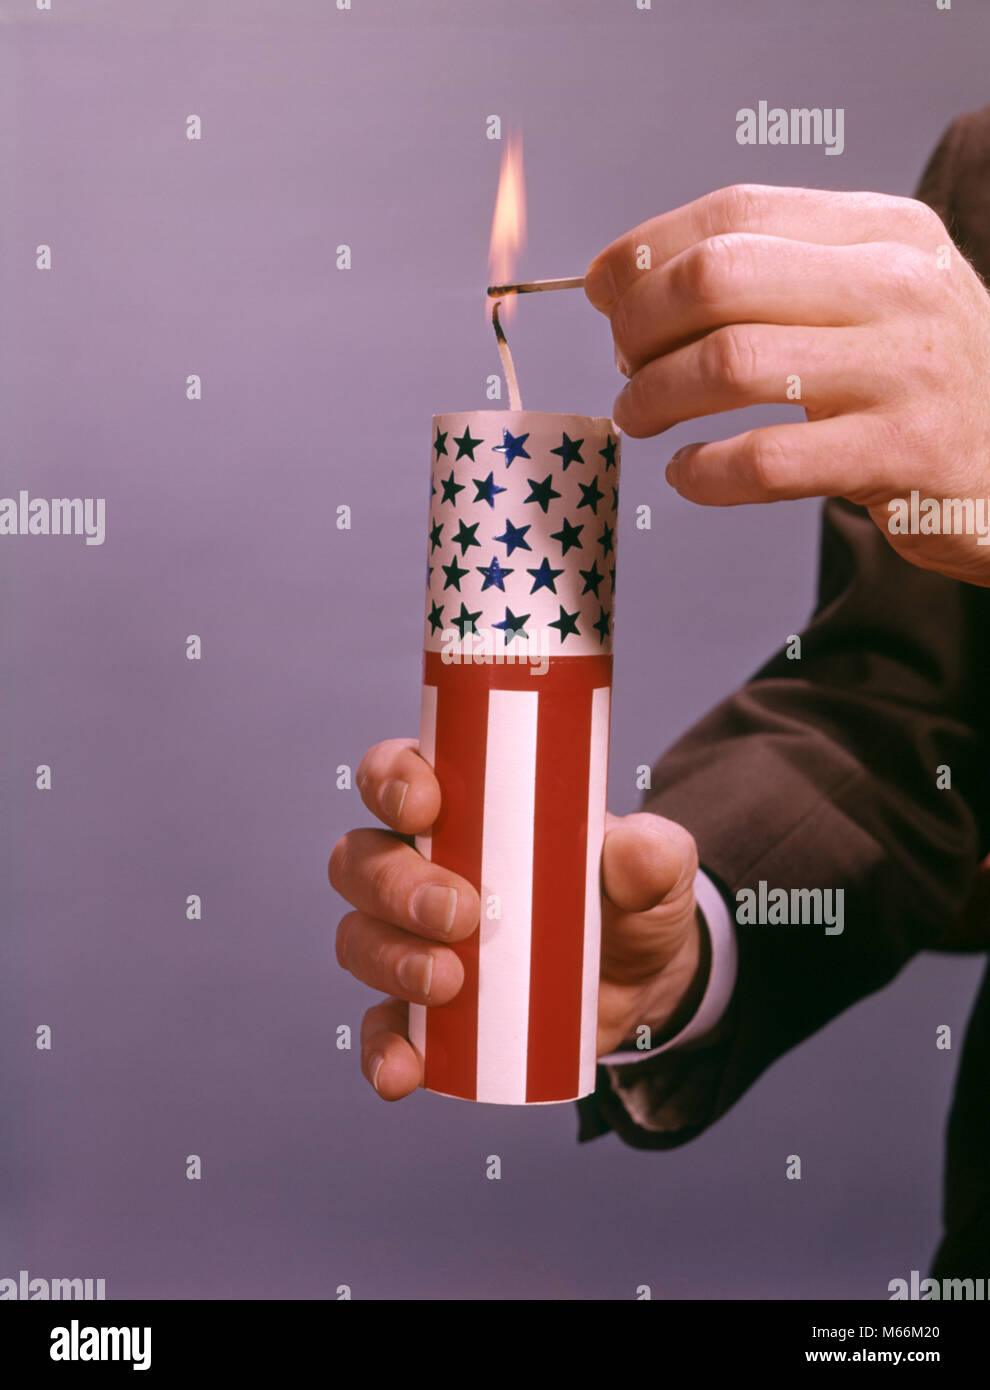 MALE HANDS LIGHTING A GIANT RED WHITE AND BLUE AMERICAN FIRECRACKER - kf5437 HAR001 HARS MATCH DANGER RISK INDOORS STRIPES AMERICANA NOSTALGIA 20-25 YEARS FREEDOM SINGLE OBJECT DANGEROUS AND EXCITEMENT LIT 18-19 YEARS 1776 MATCHES PATRIOT POLITICS FIRECRACKER CONCEPTUAL STILL LIFE CLOSE-UP FIRECRACKERS PATRIOTIC SYMBOLIC EXPLODE MALES RED WHITE AND BLUE YOUNG ADULT MAN CAUCASIAN ETHNICITY FOURTH OF JULY FUZE IGNITING INDEPENDENCE DAY JULY 4TH OLD FASHIONED PERSONS WICK Stock Photo